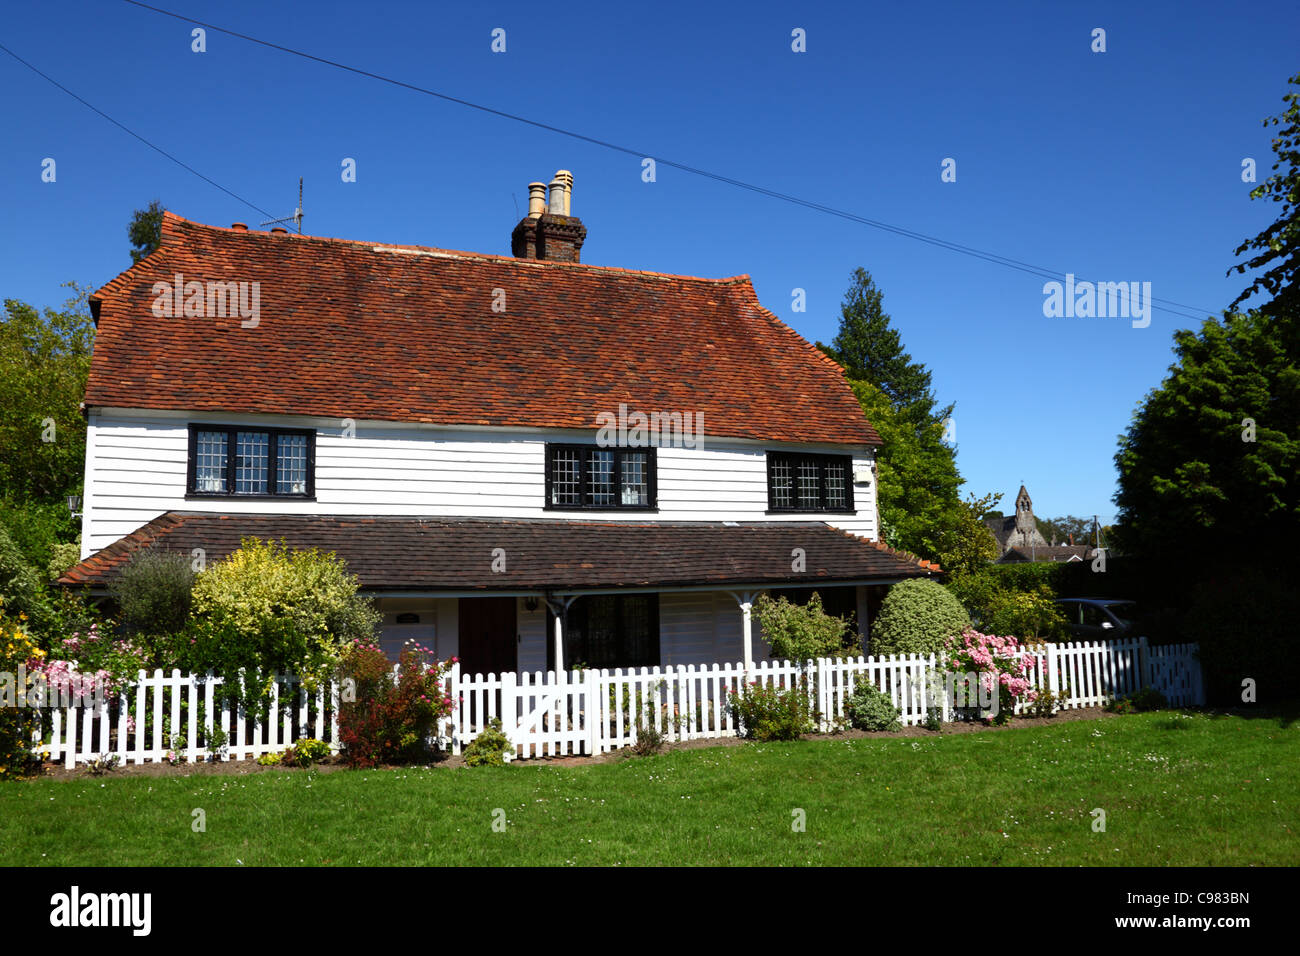 Stuart cottage, a 16th century Grade II listed traditional weatherboarded cottage, Southborough Common, near Tunbridge Wells, Kent, England Stock Photo